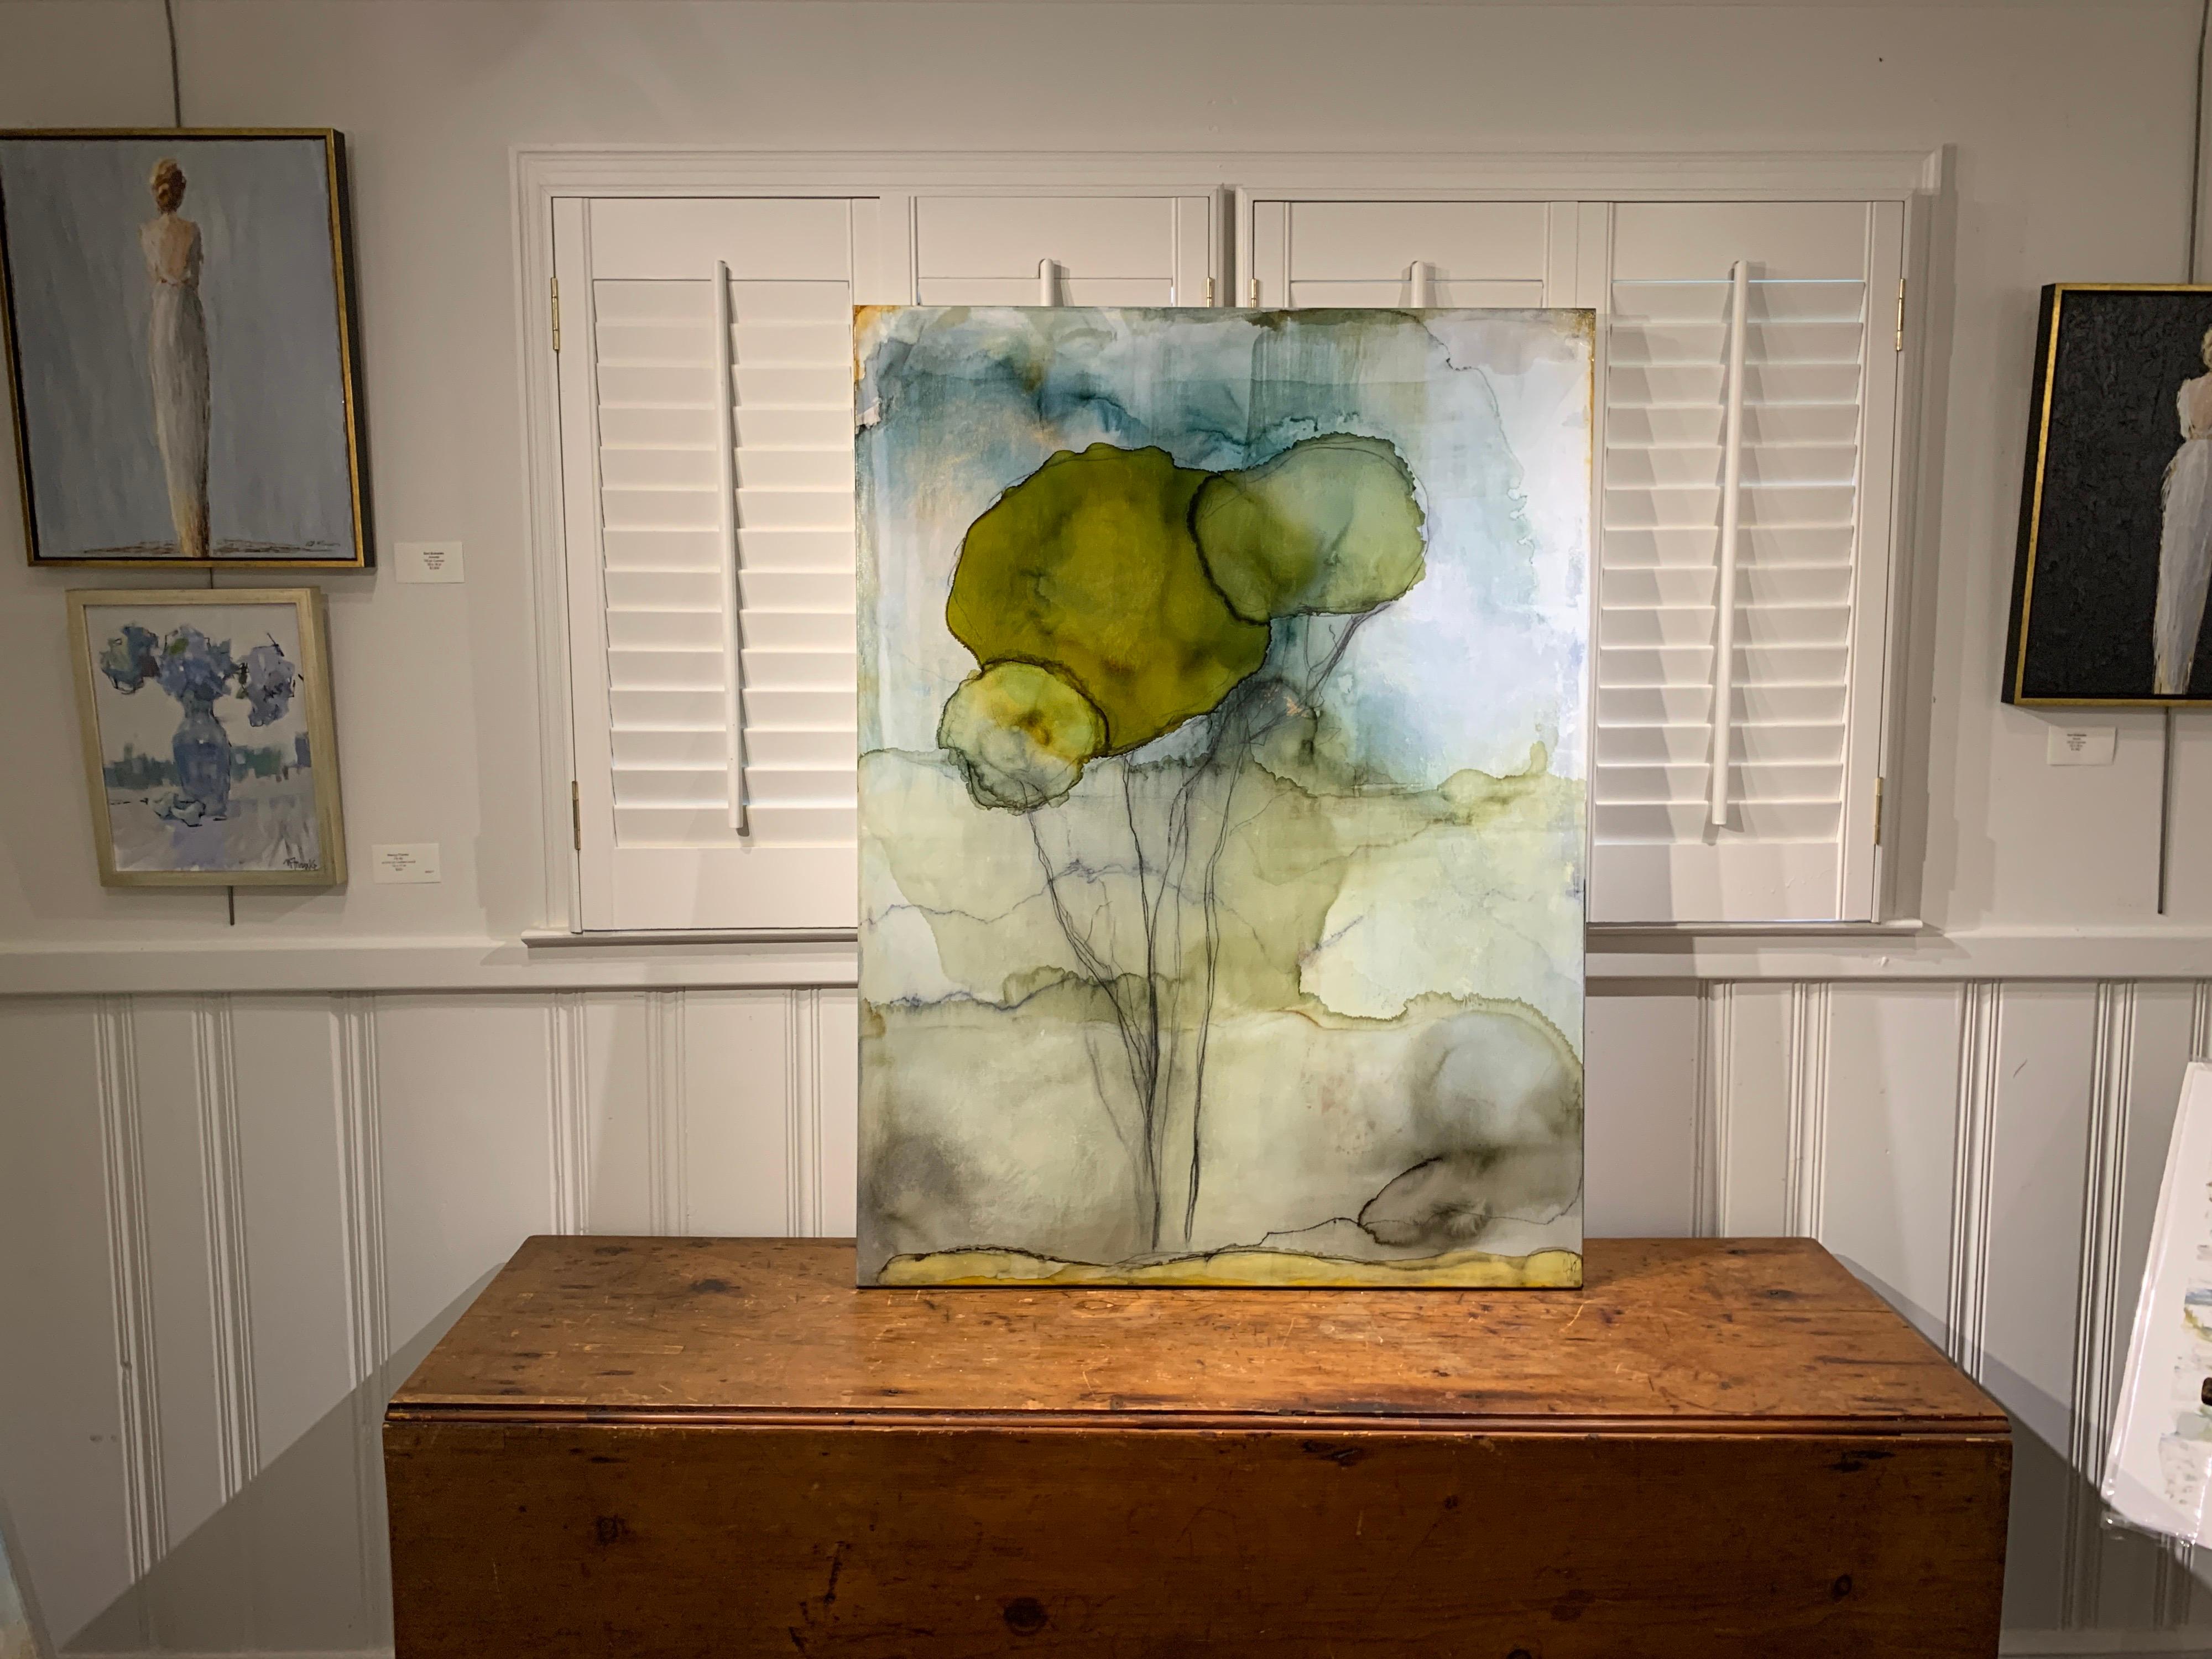 Shirley’s love of creating came at an early age. She learned many of her techniques from the time she spent with her depression-era grandmother, making artistic statements from items found. Working with various mediums over the past 25 years, she